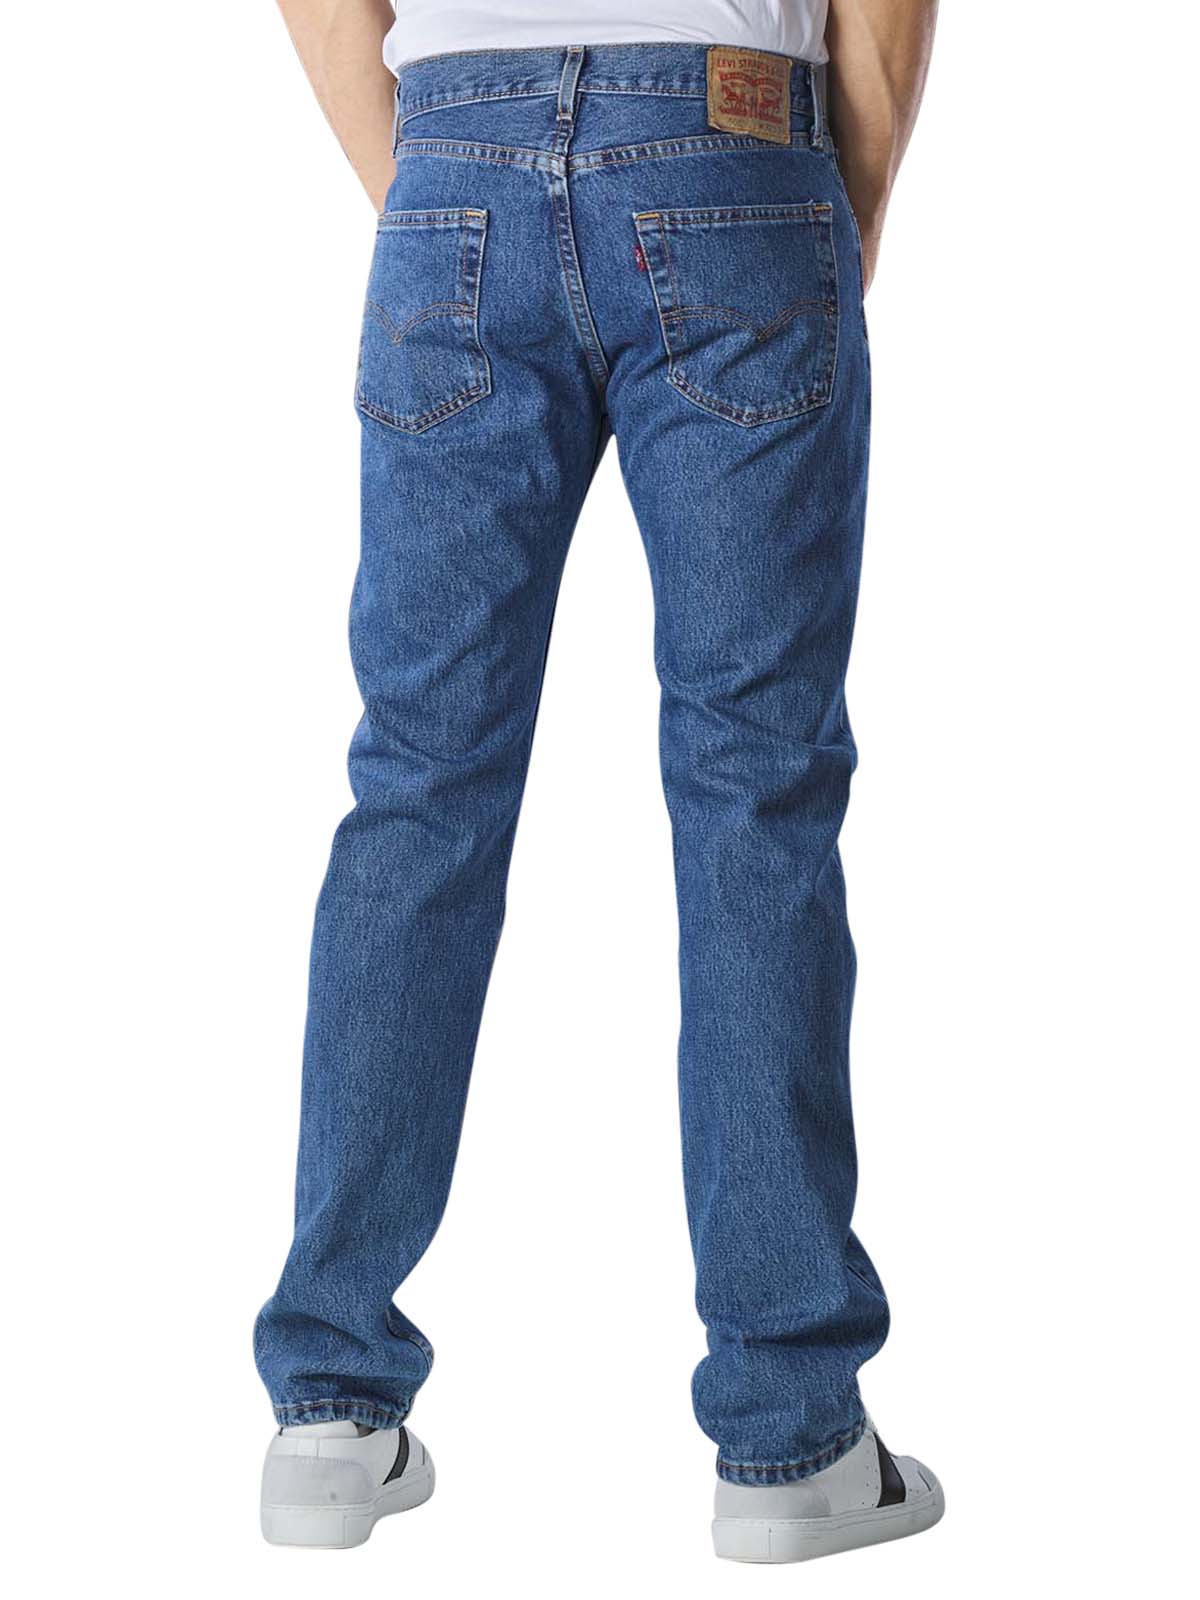 Levi's 505 Jeans stonewash (zip) Levi's Men's Jeans | Free Shipping on   - SIMPLY LOOK GOOD